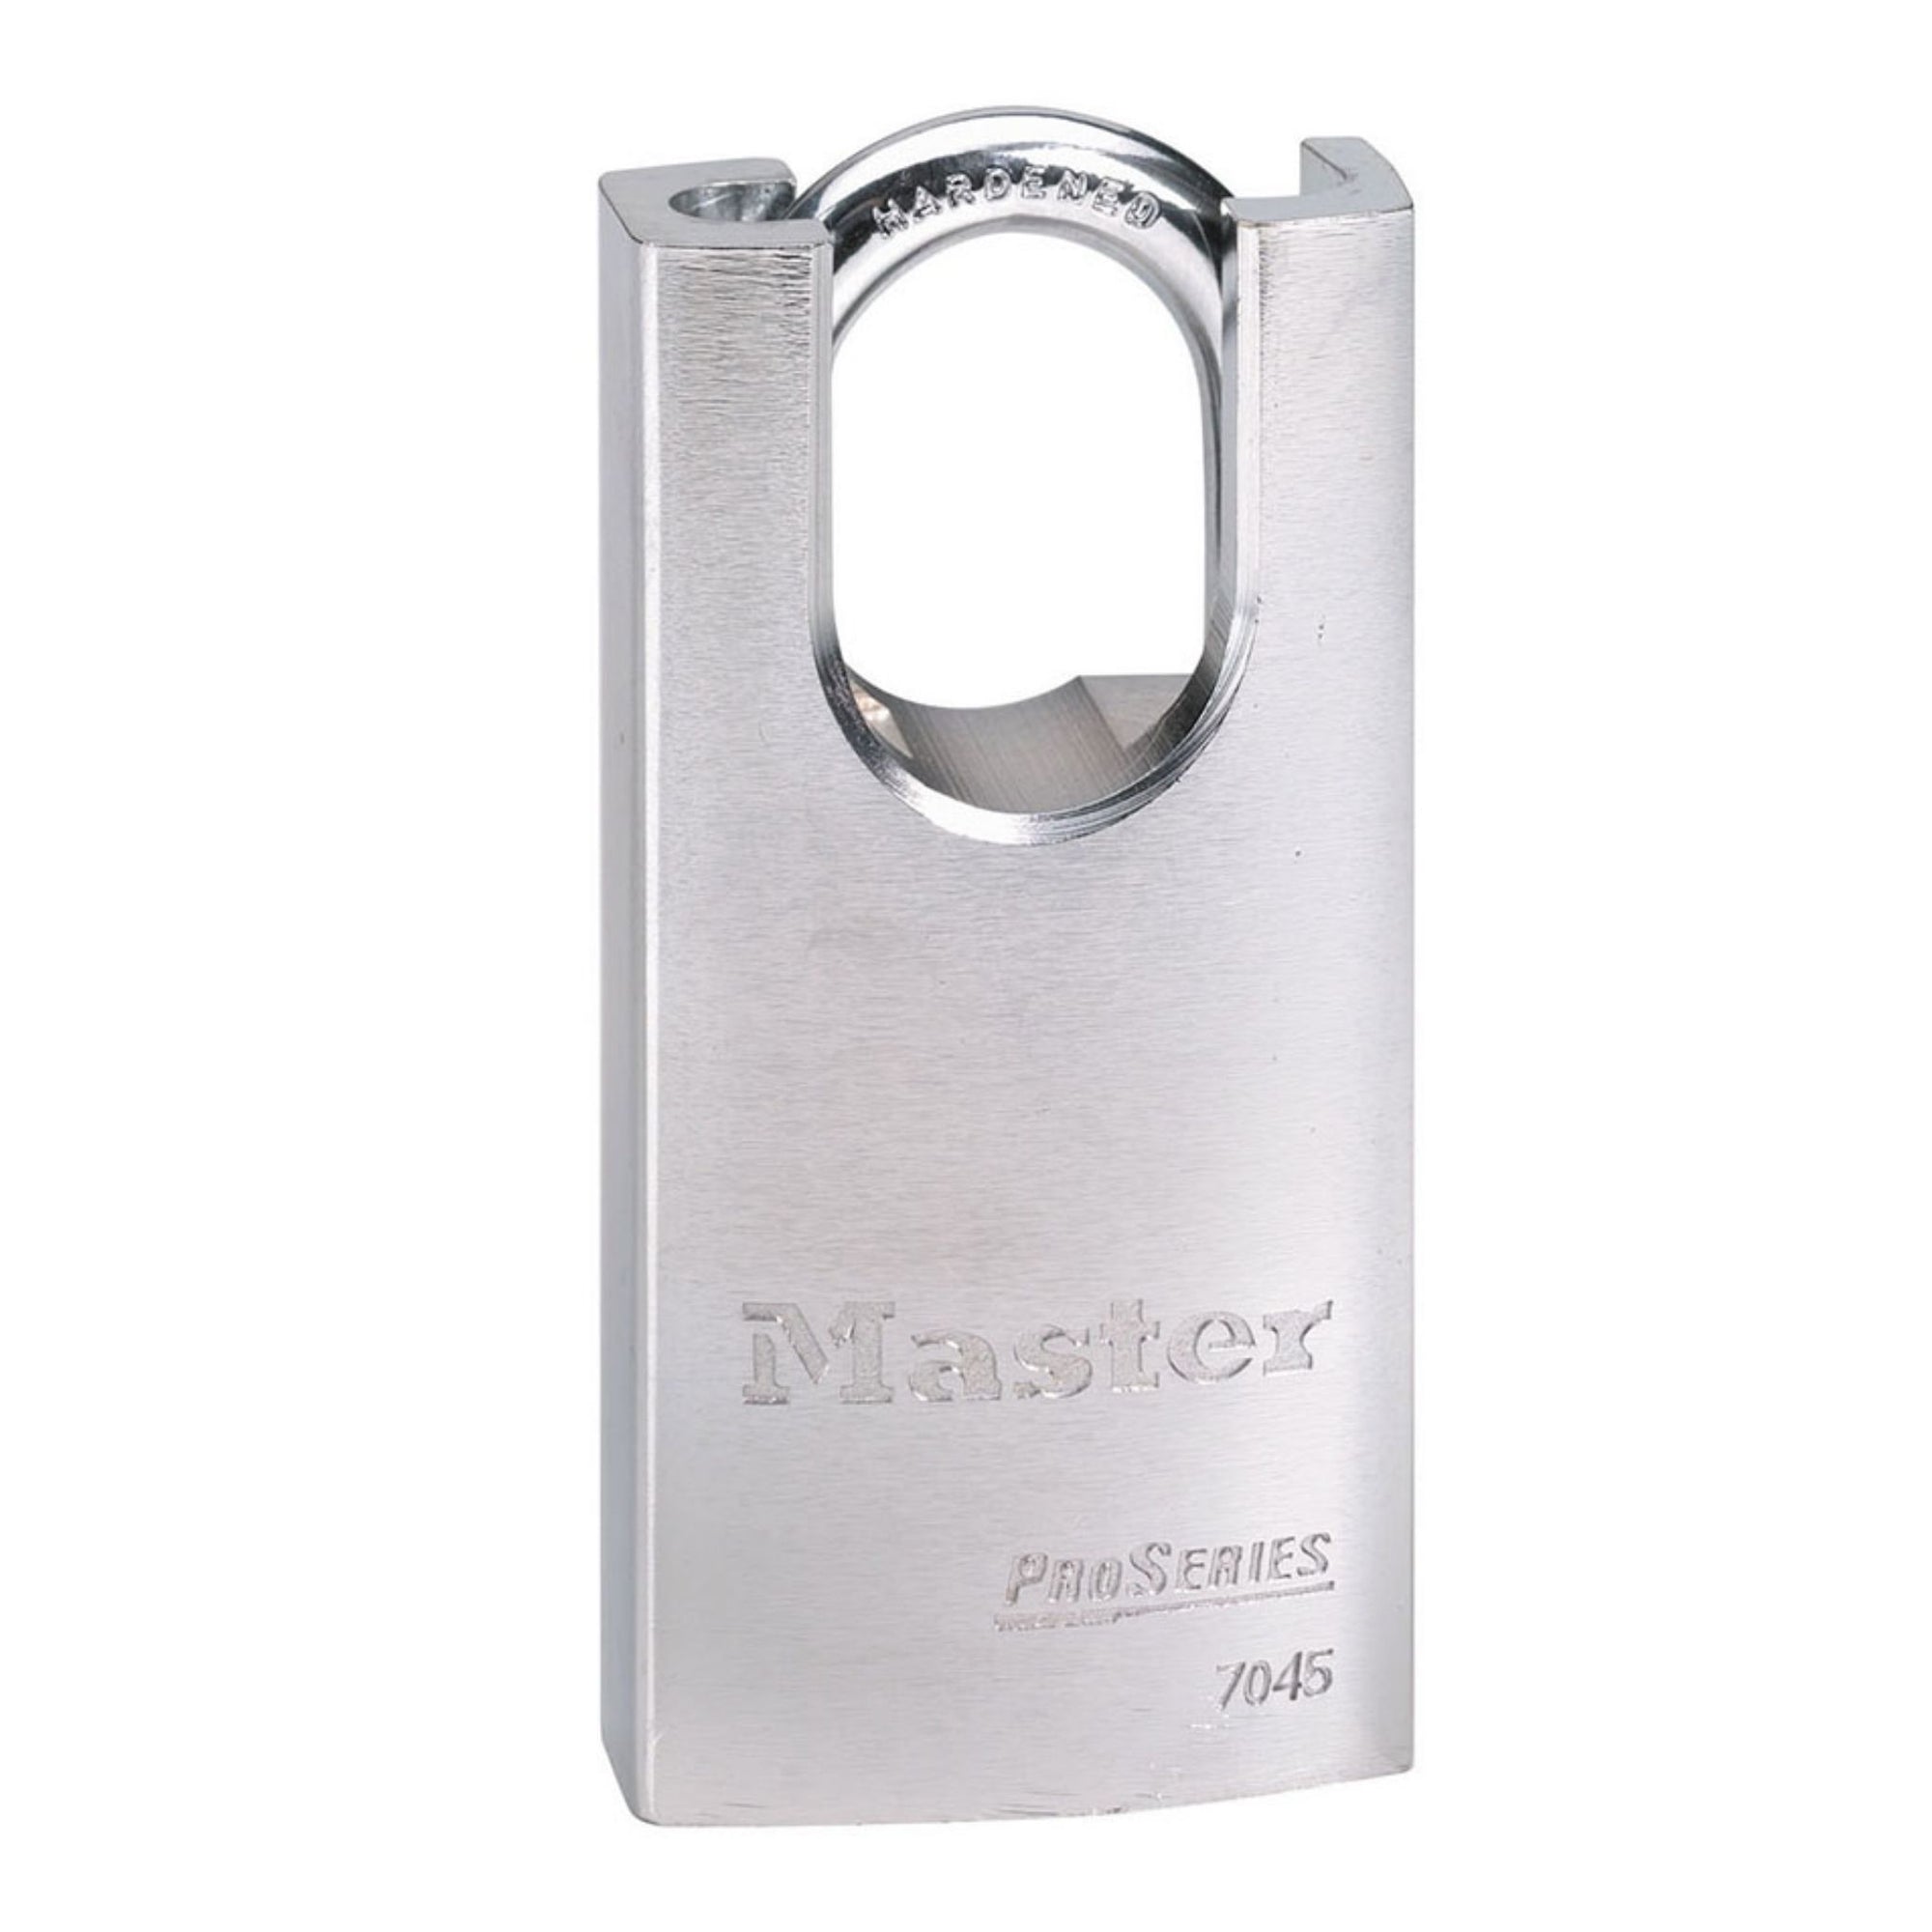 Master Lock No. 7045 Pro Series Locks with Shrouded Shackle - The Lock Source